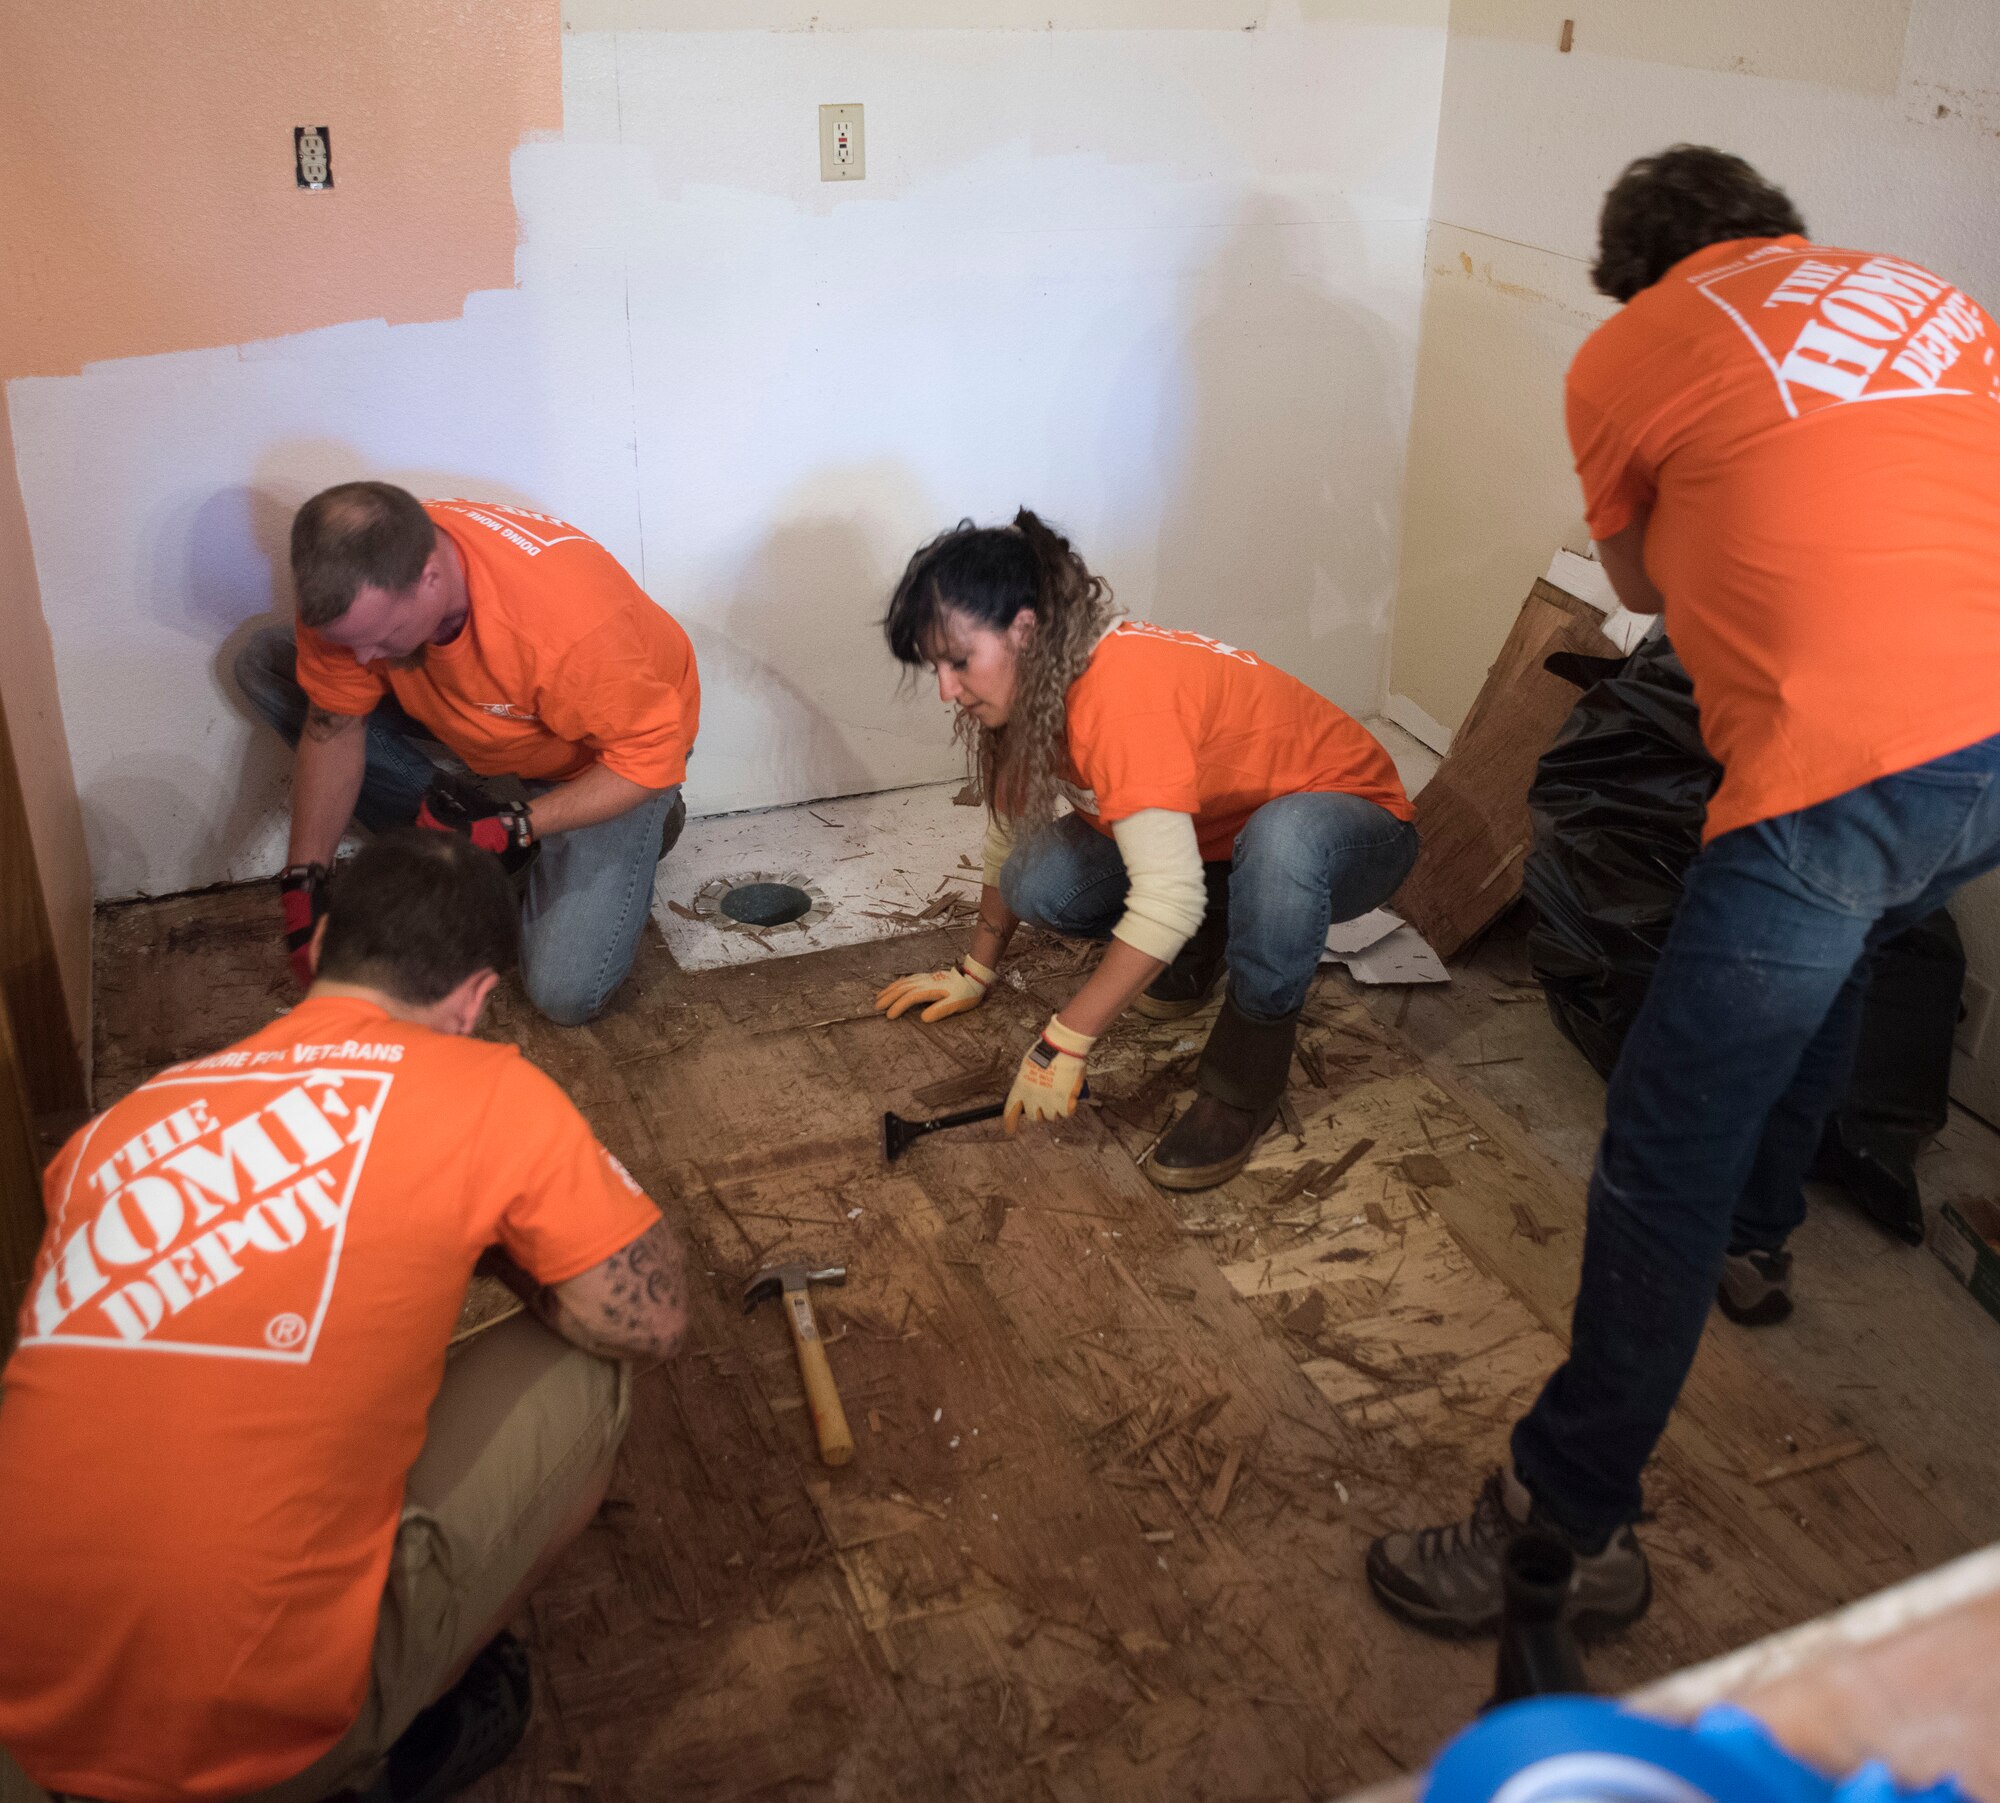 ANCHORAGE, Alaska -- Volunteers from the Alaska District of hardware chain Home Depot work together Sept. 14, 2016 to replace flooring in the kitchen of Staff Sgt. Sequoya Joseph, a personnelist with the Alaska Air National Guard's 176th Force Support Flight. The effort was the result of a partnership between Home Depot's annual Celebration of Service Campaign and the non-profit That Others May Live Foundation. National Guard photo by Maj. John Callahan.